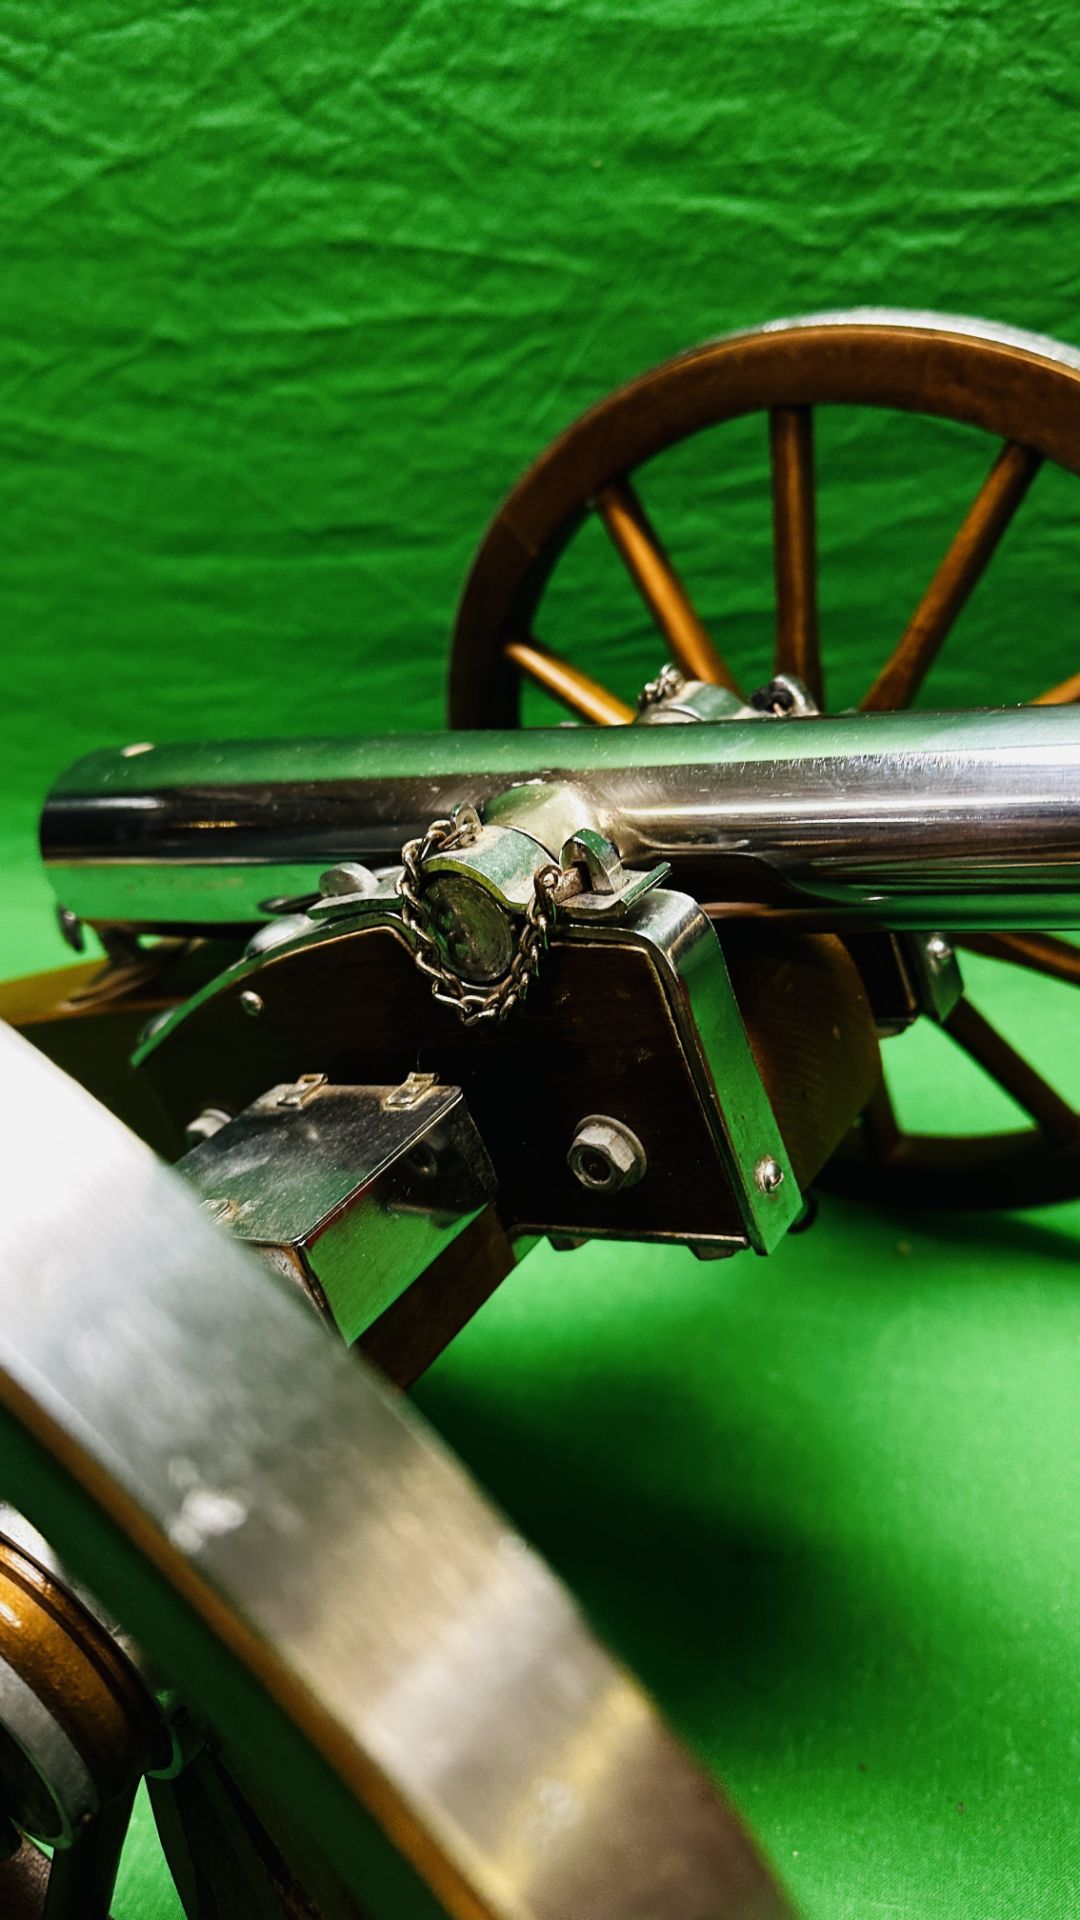 A SPANISH 75 CAL BLACK POWDER ARMAS GIL CANNON 14" BARREL MOUNTED ON A CARRIAGE. - Image 5 of 15